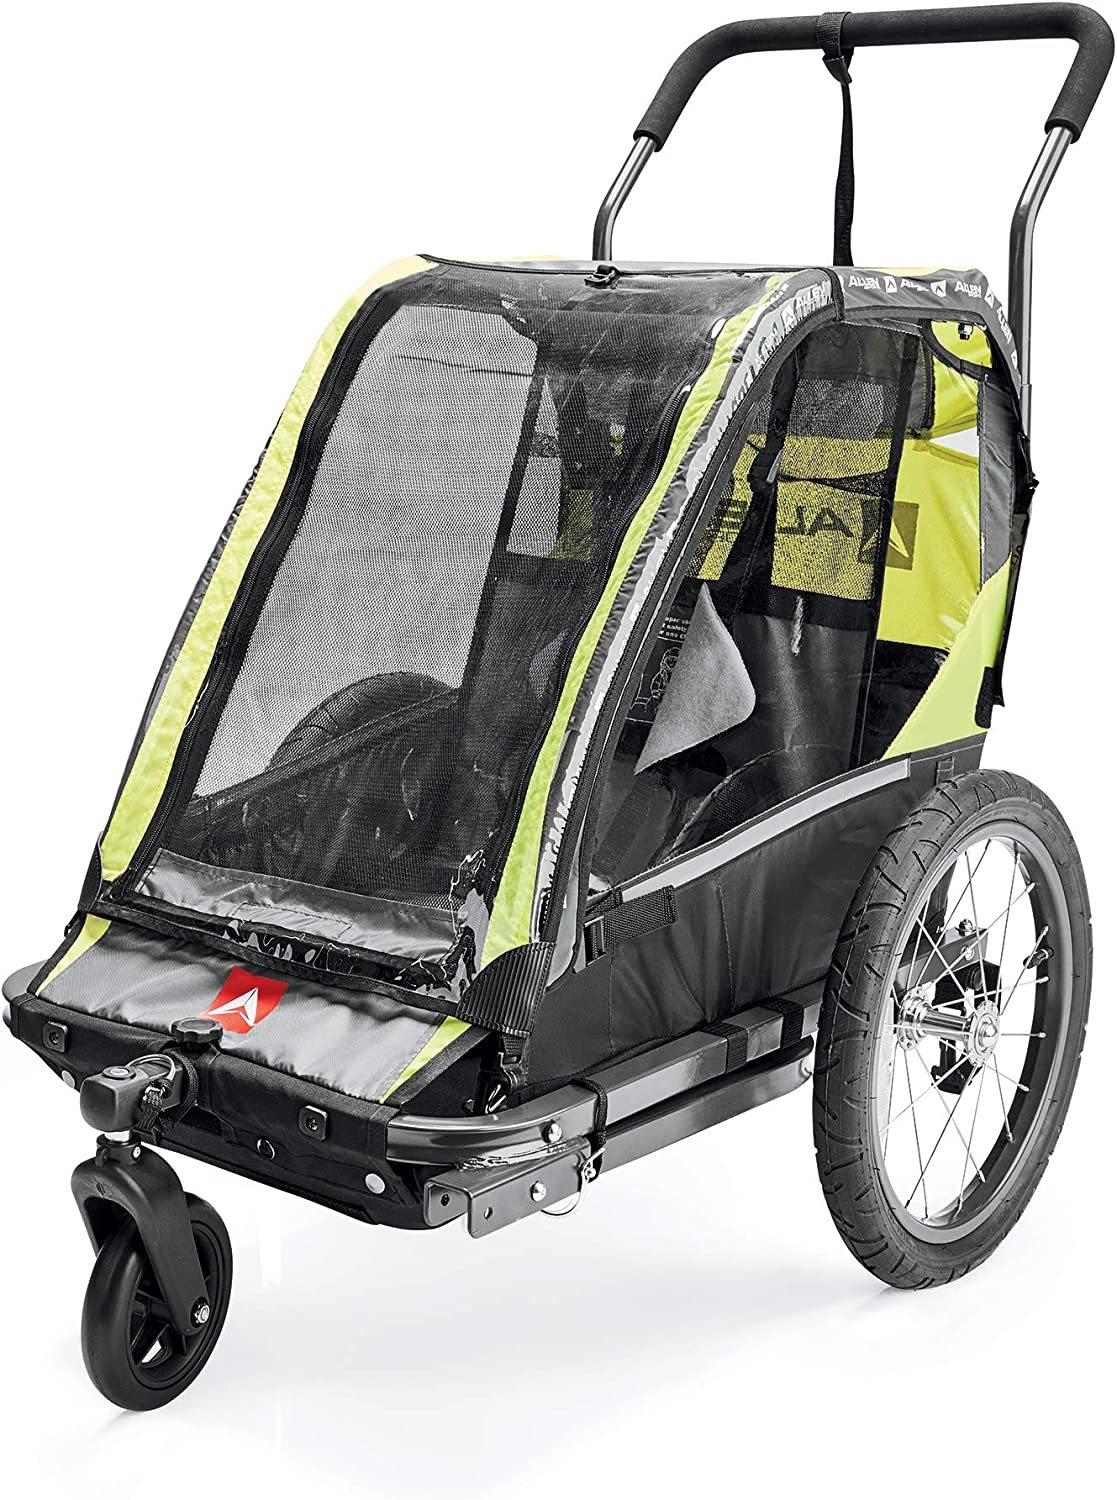 Deluxe Bike Trailer And Stroller From Allen Sports. - $261.93